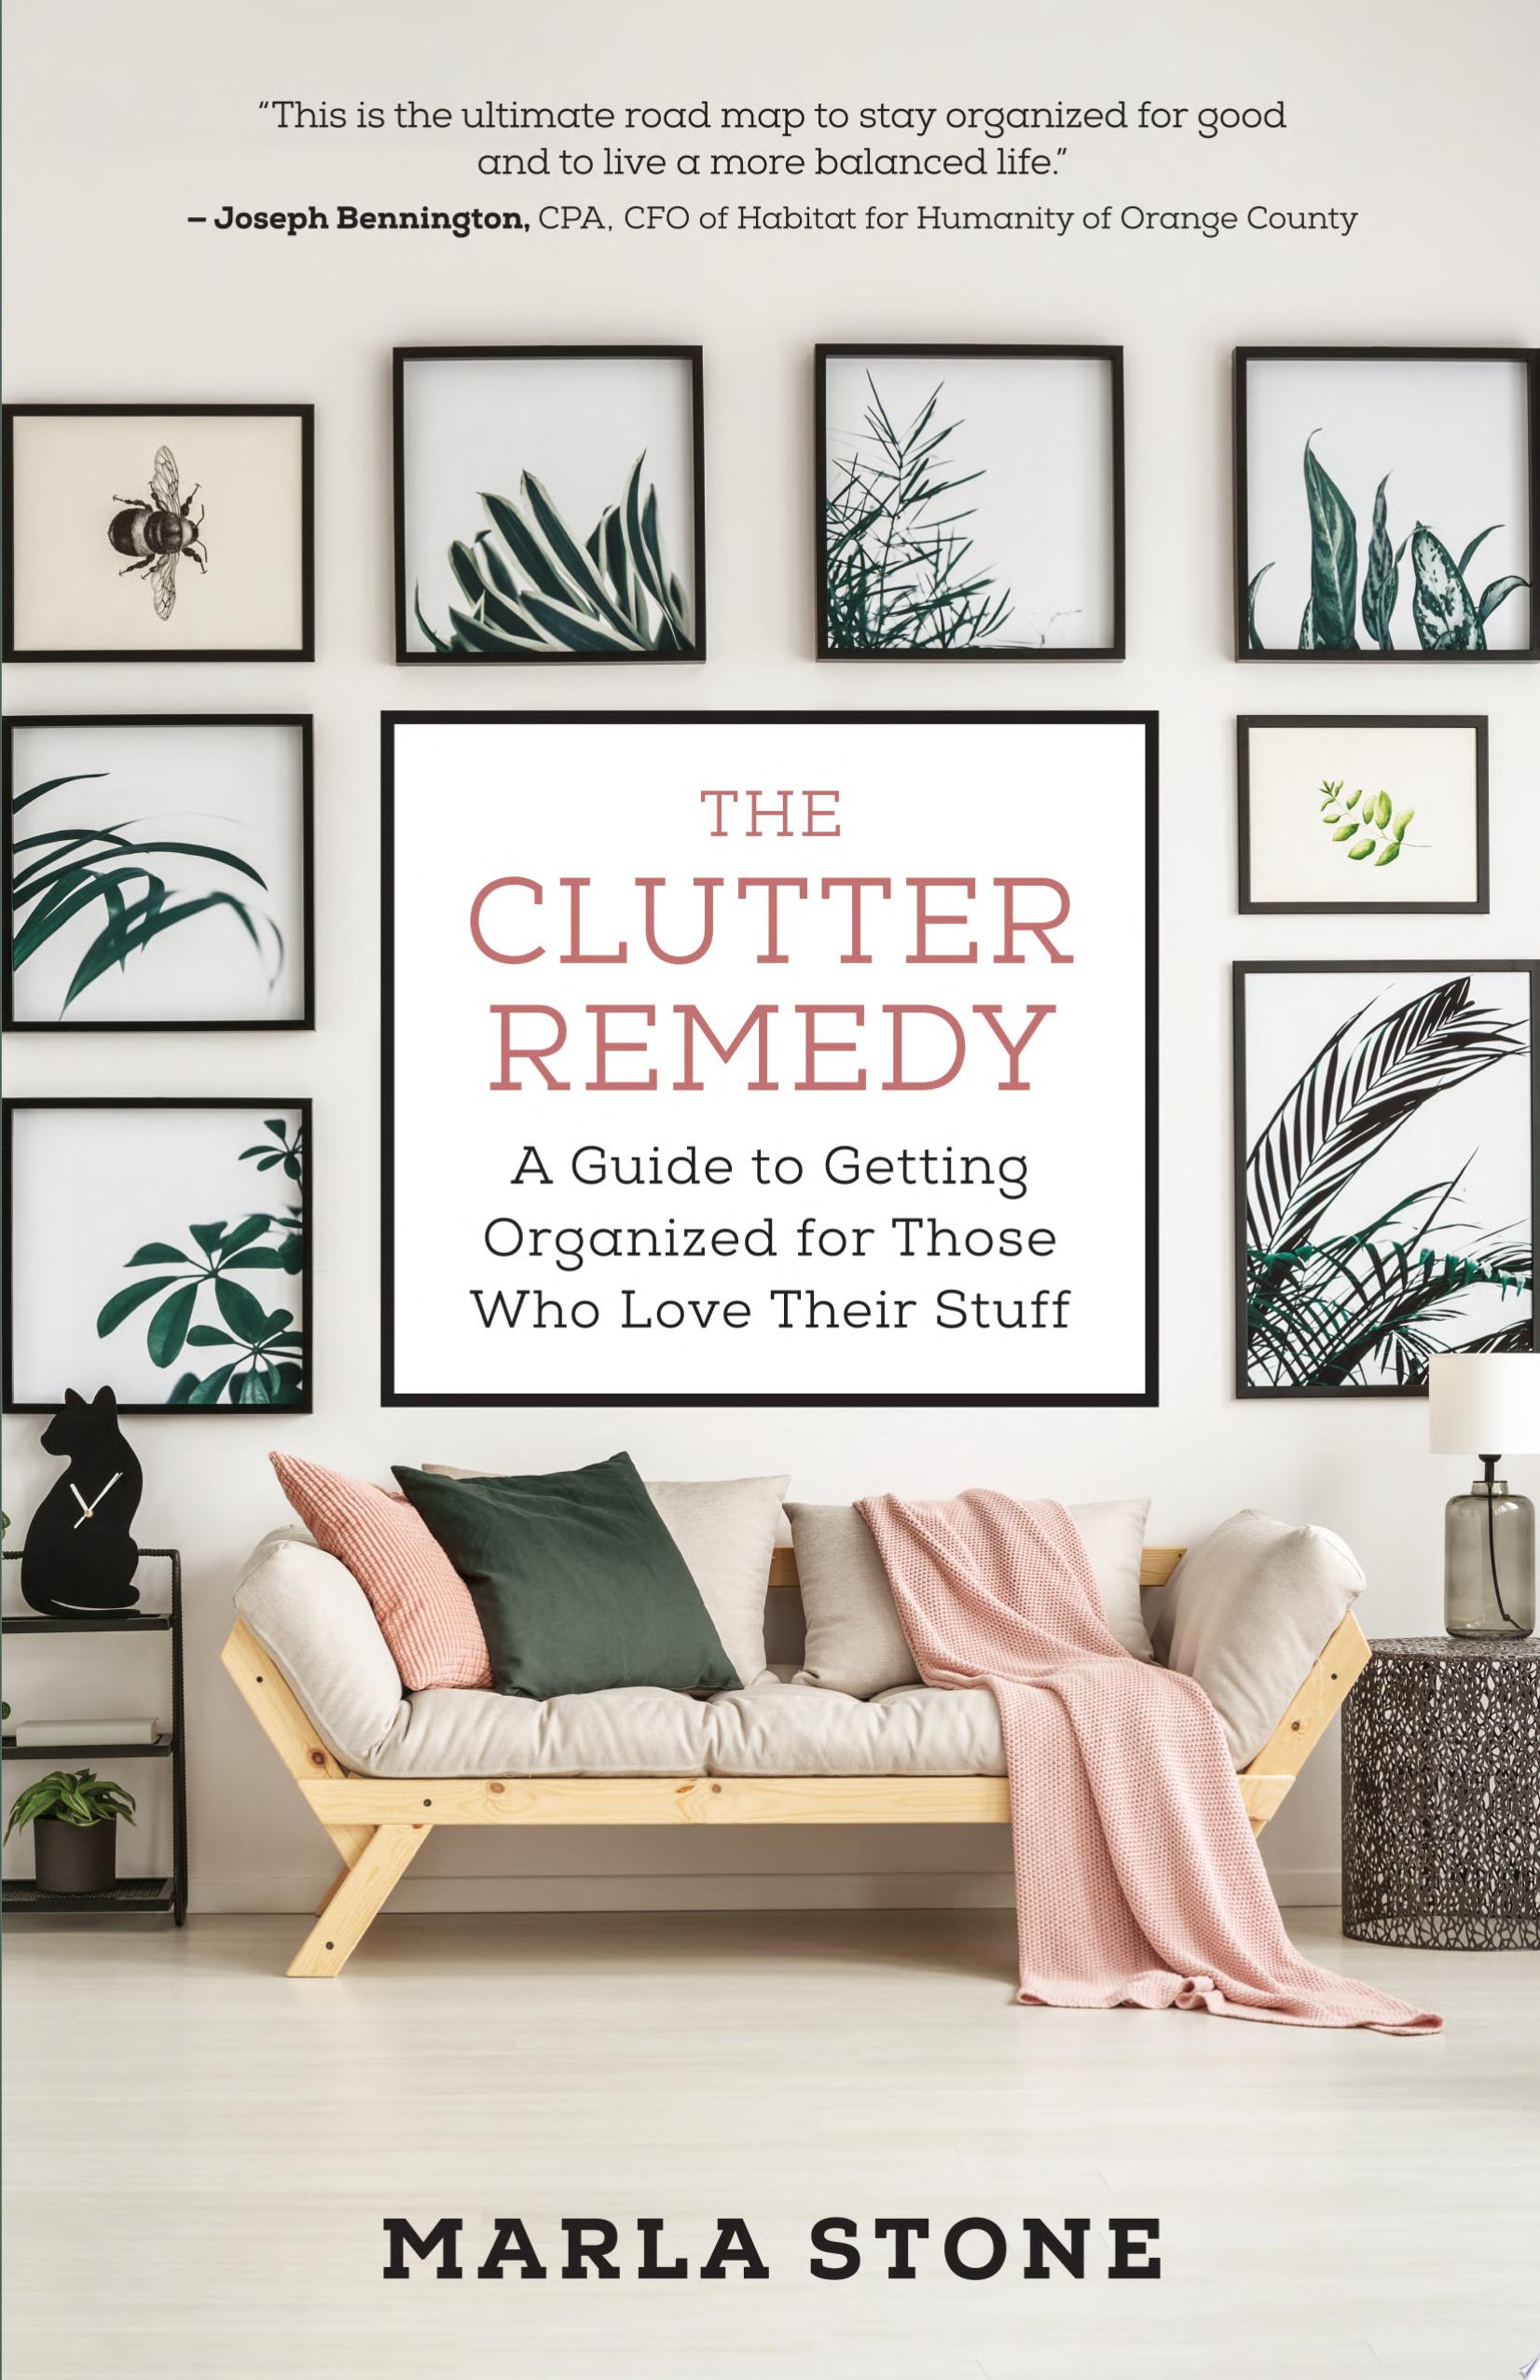 Image for "The Clutter Remedy"